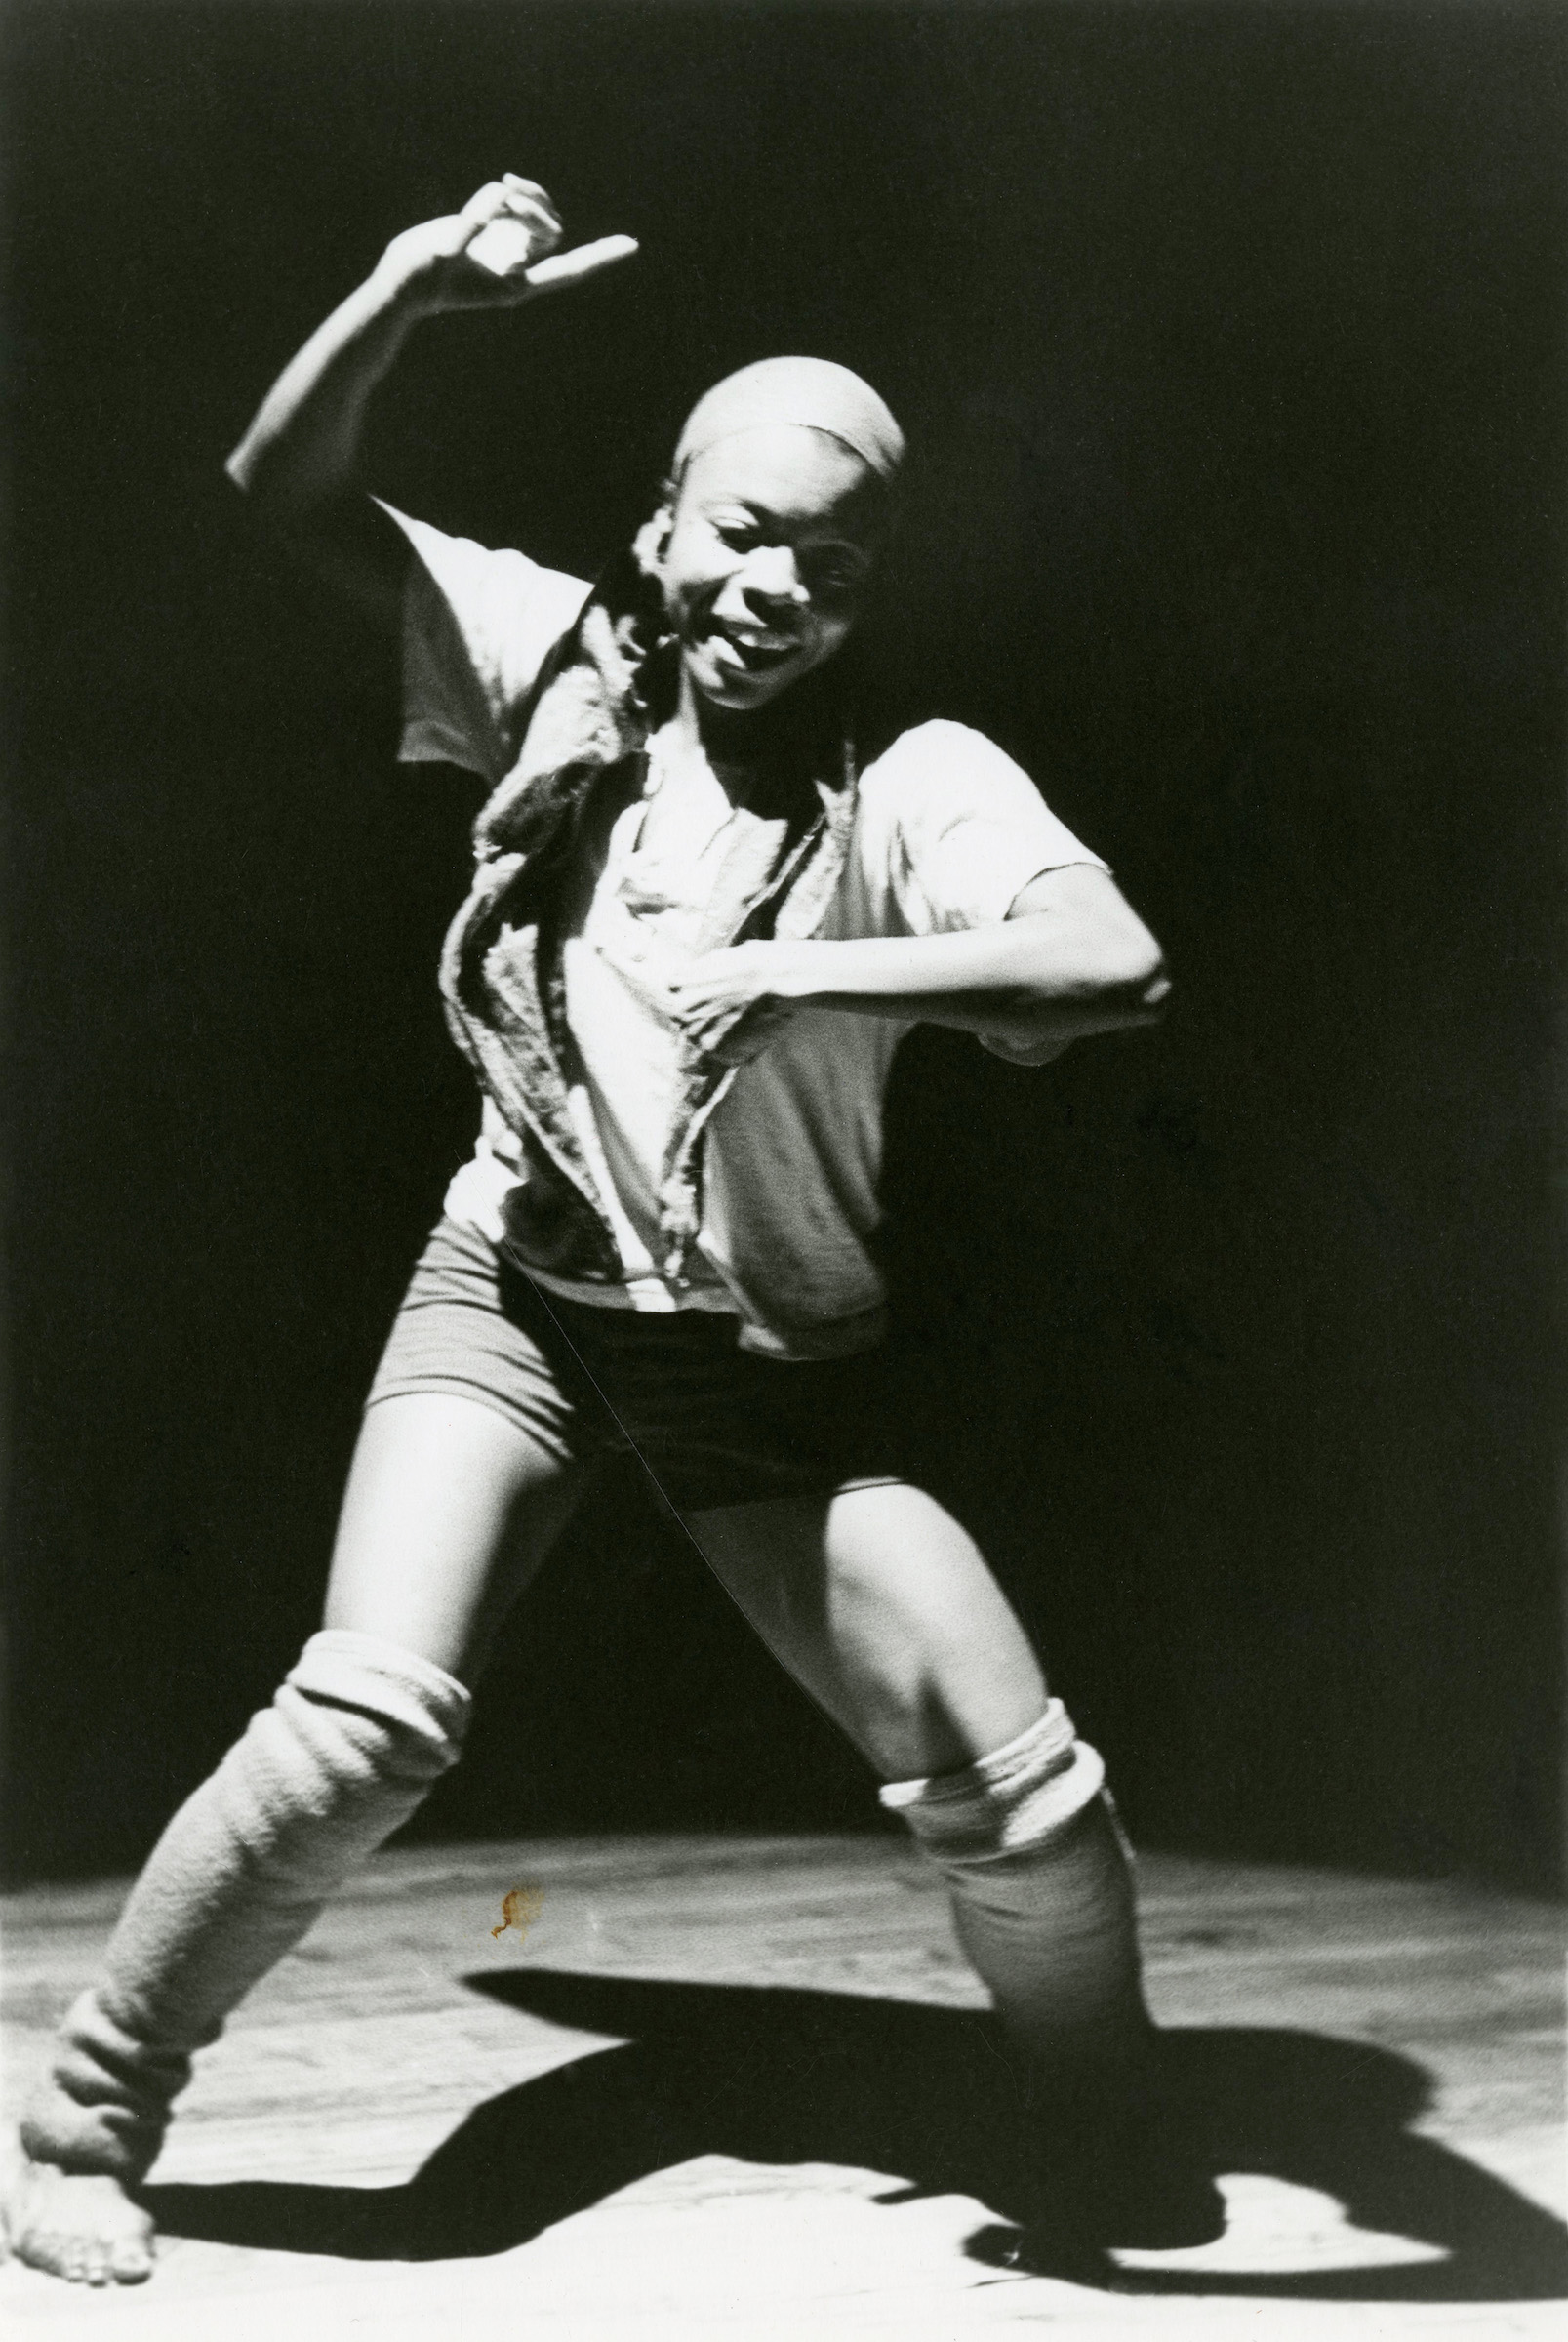 Lona Foote (American, 1948–1993). Blondell Cummings performing “Blind Dates” at Just Above Midtown Gallery, November 1982, 1982. Photograph, 10 x 8 in. (25.4 x 20.3 cm). Special Collections and University Archives, Rutgers University Libraries. © Estate of Lona Foote, courtesy of Howard Mandel